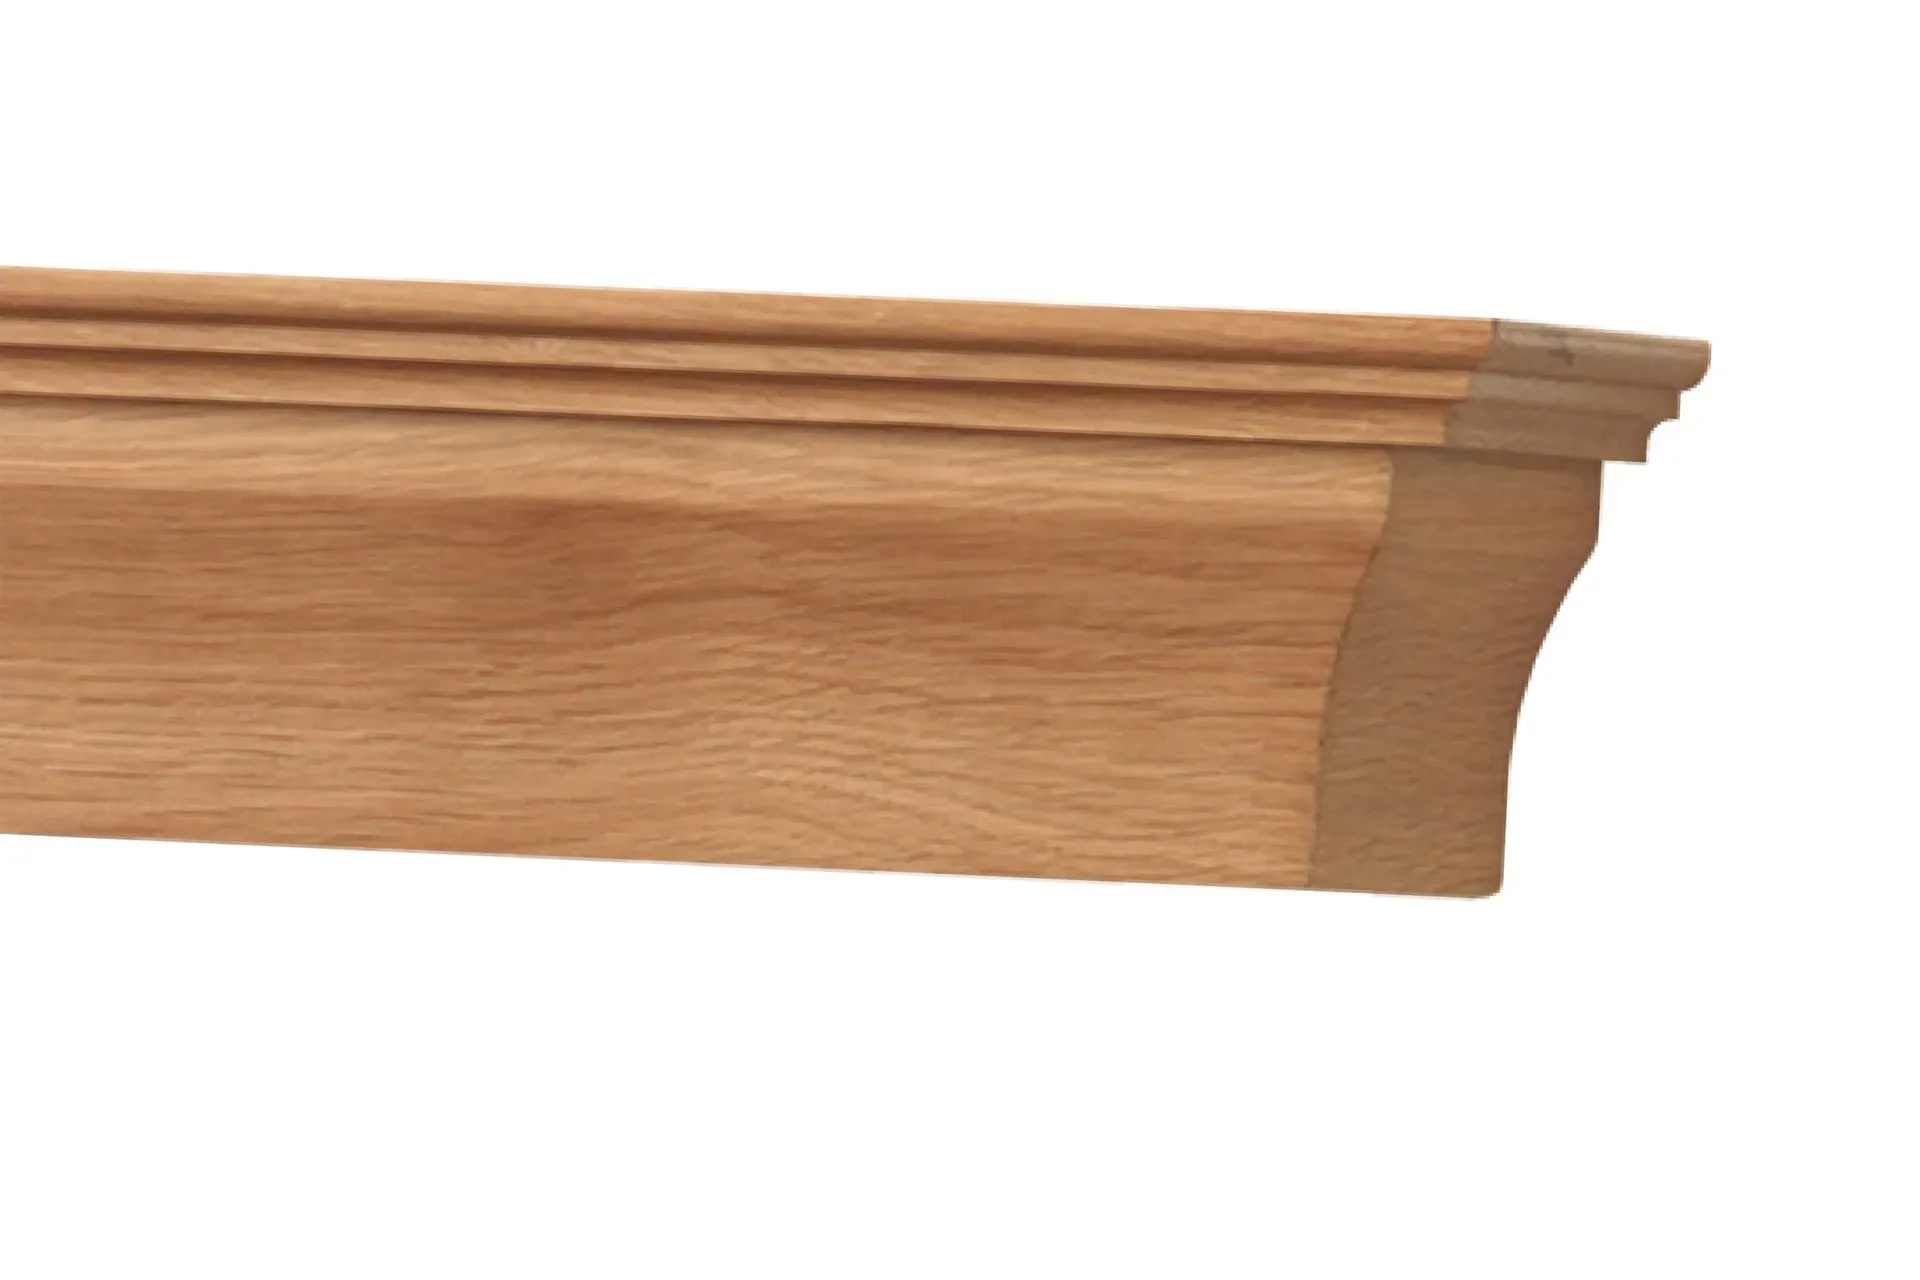 The gallery collection fireplace beam contemporary